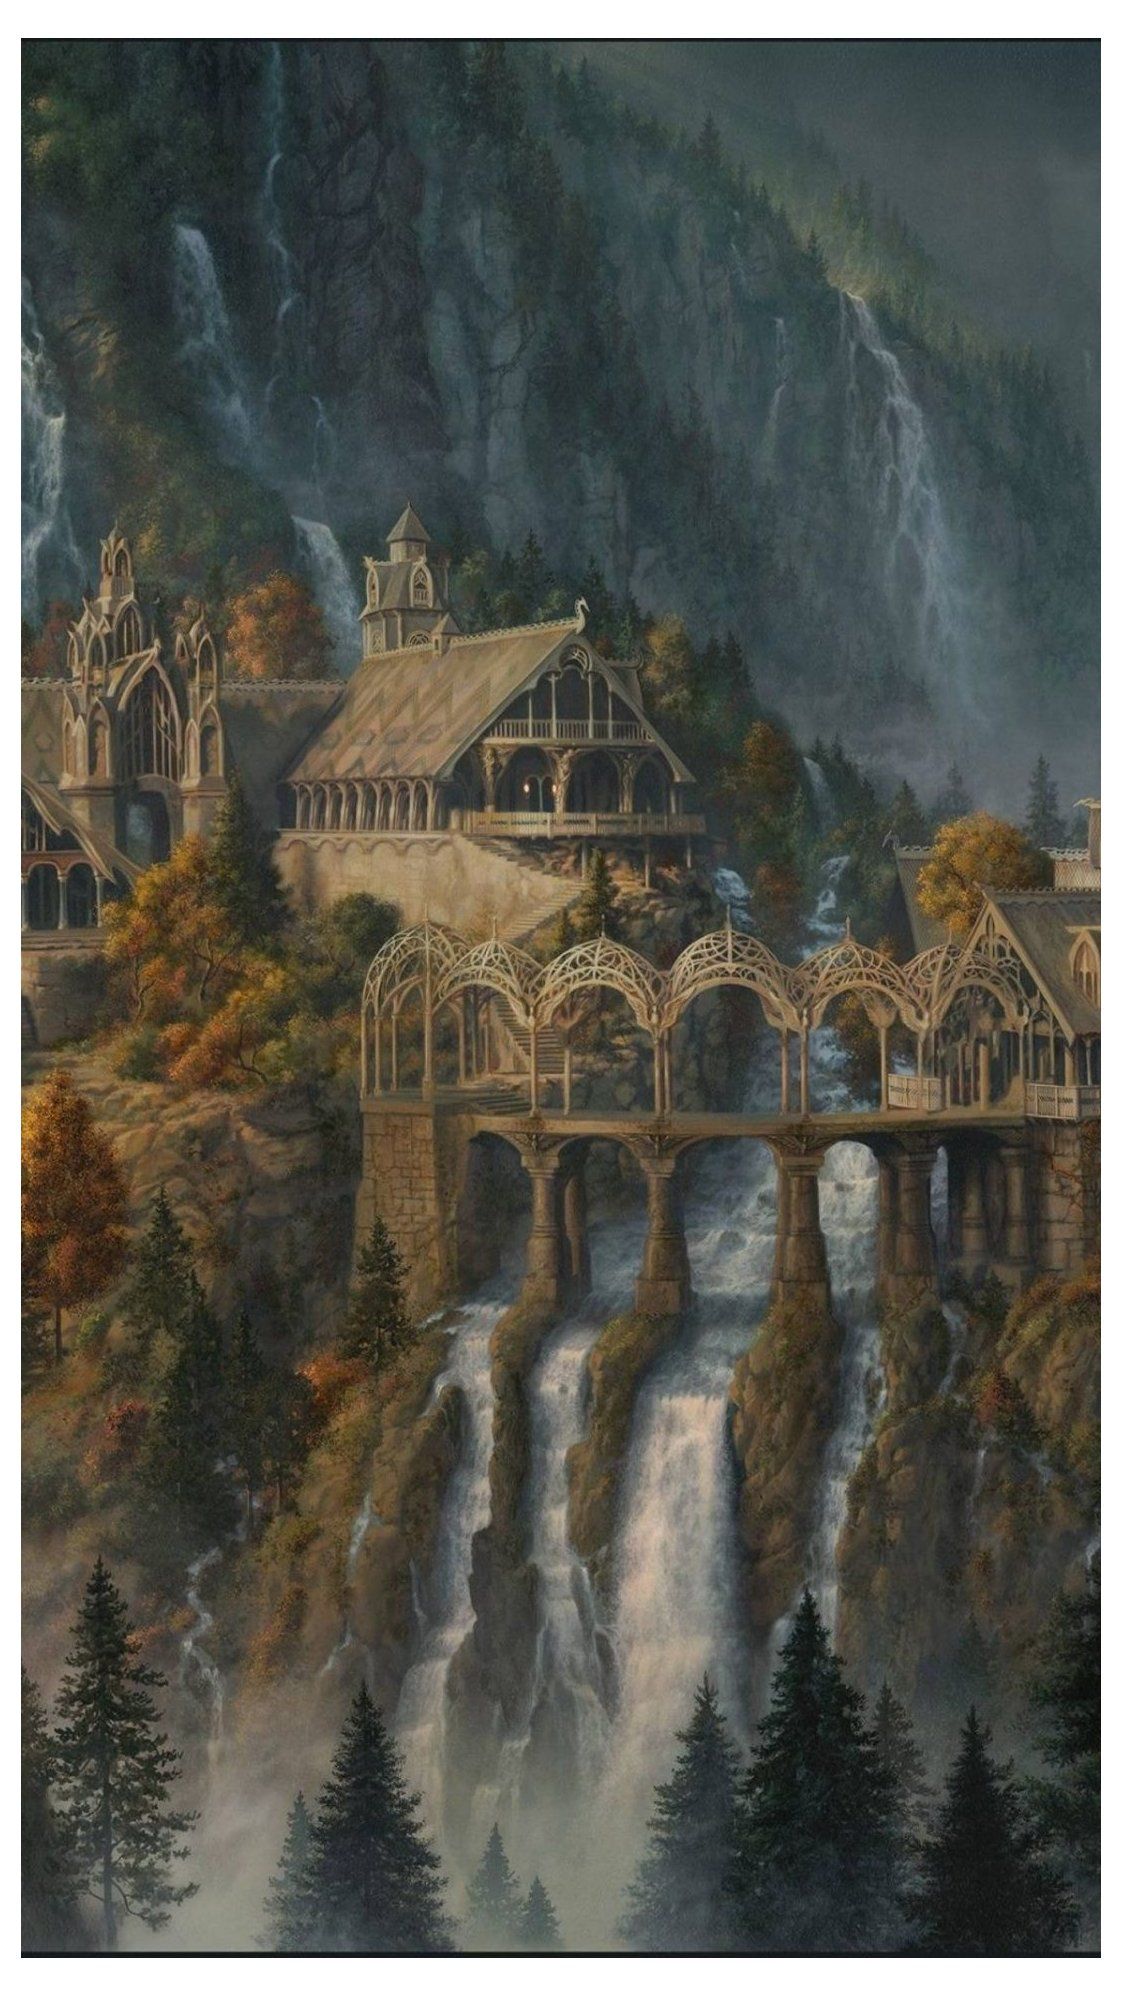 Lord of the Rings Wallpaper Rivendell  Lord of the rings Hobbit art The  hobbit